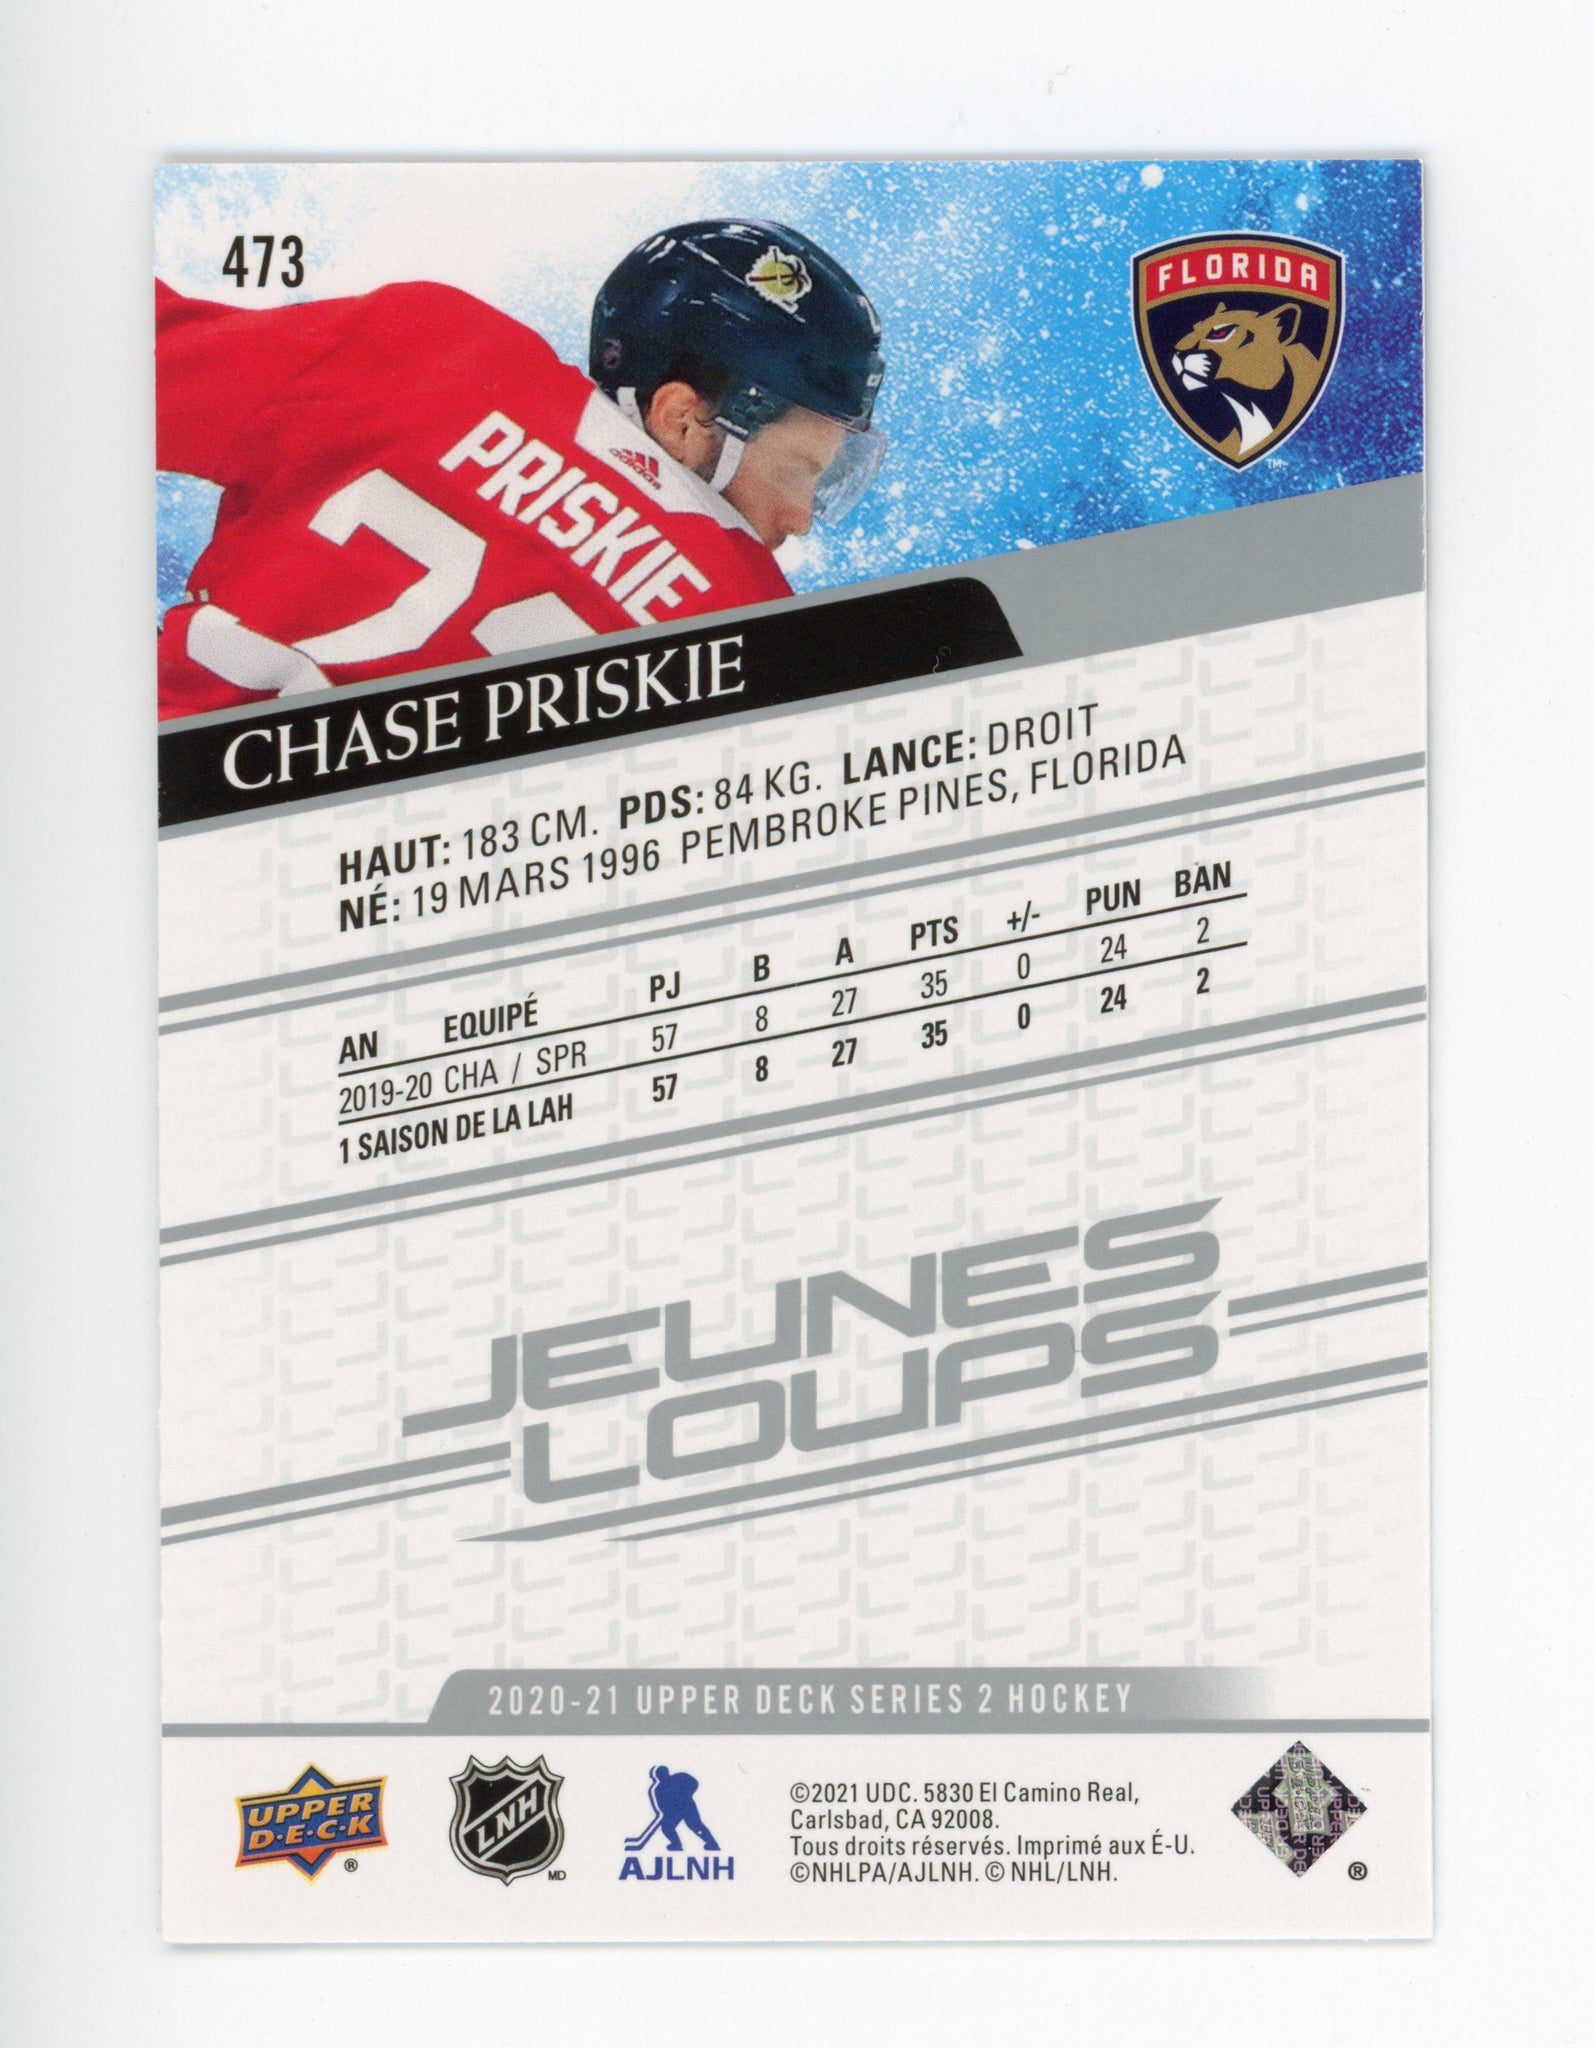 2020-2021 Chase Priskie Young Guns French Variant Florida Panthers # 473